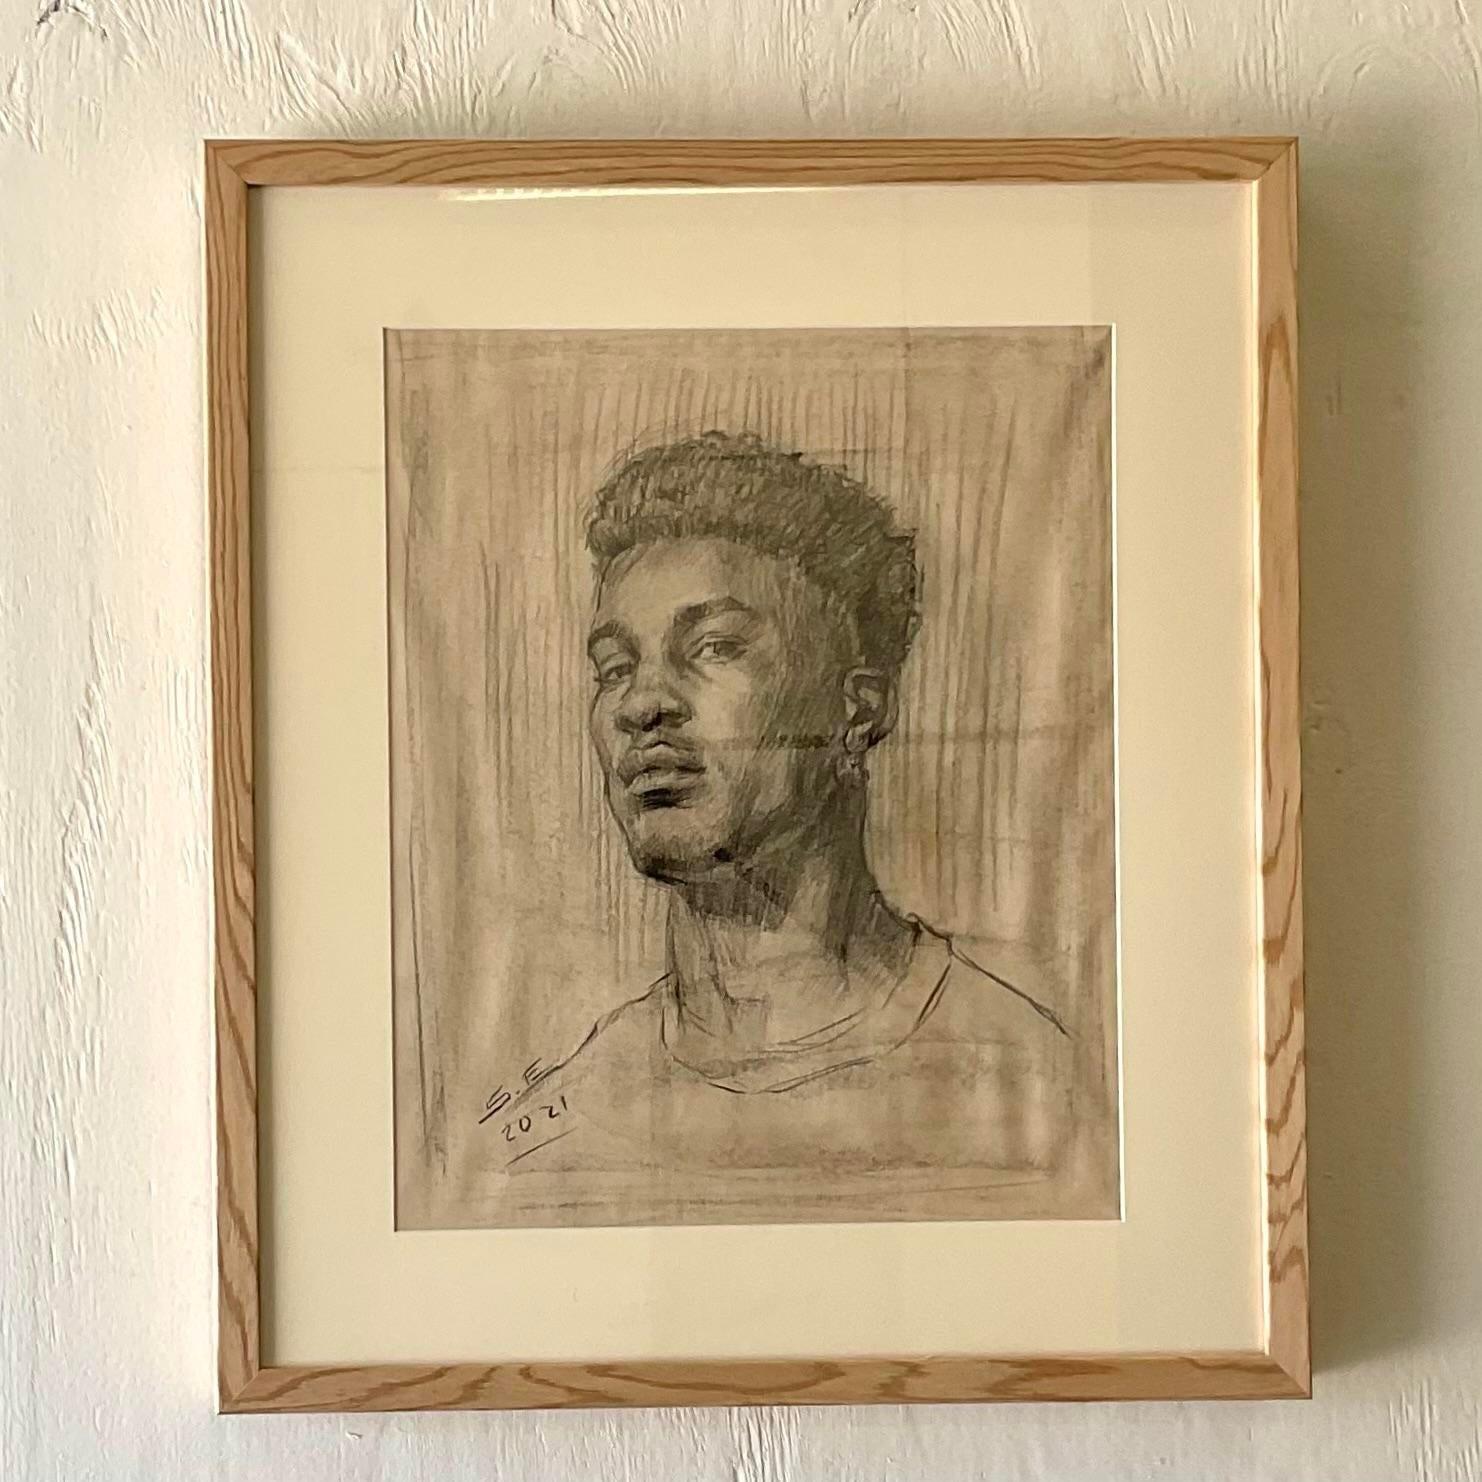 A fabulous vintage Boho original pencil drawing. A chic portrait of a young man. Signed and dated by the artist. Newly framed in a wood frame with beautiful wood grain detail. Acquired from a Palm Beach estate. 